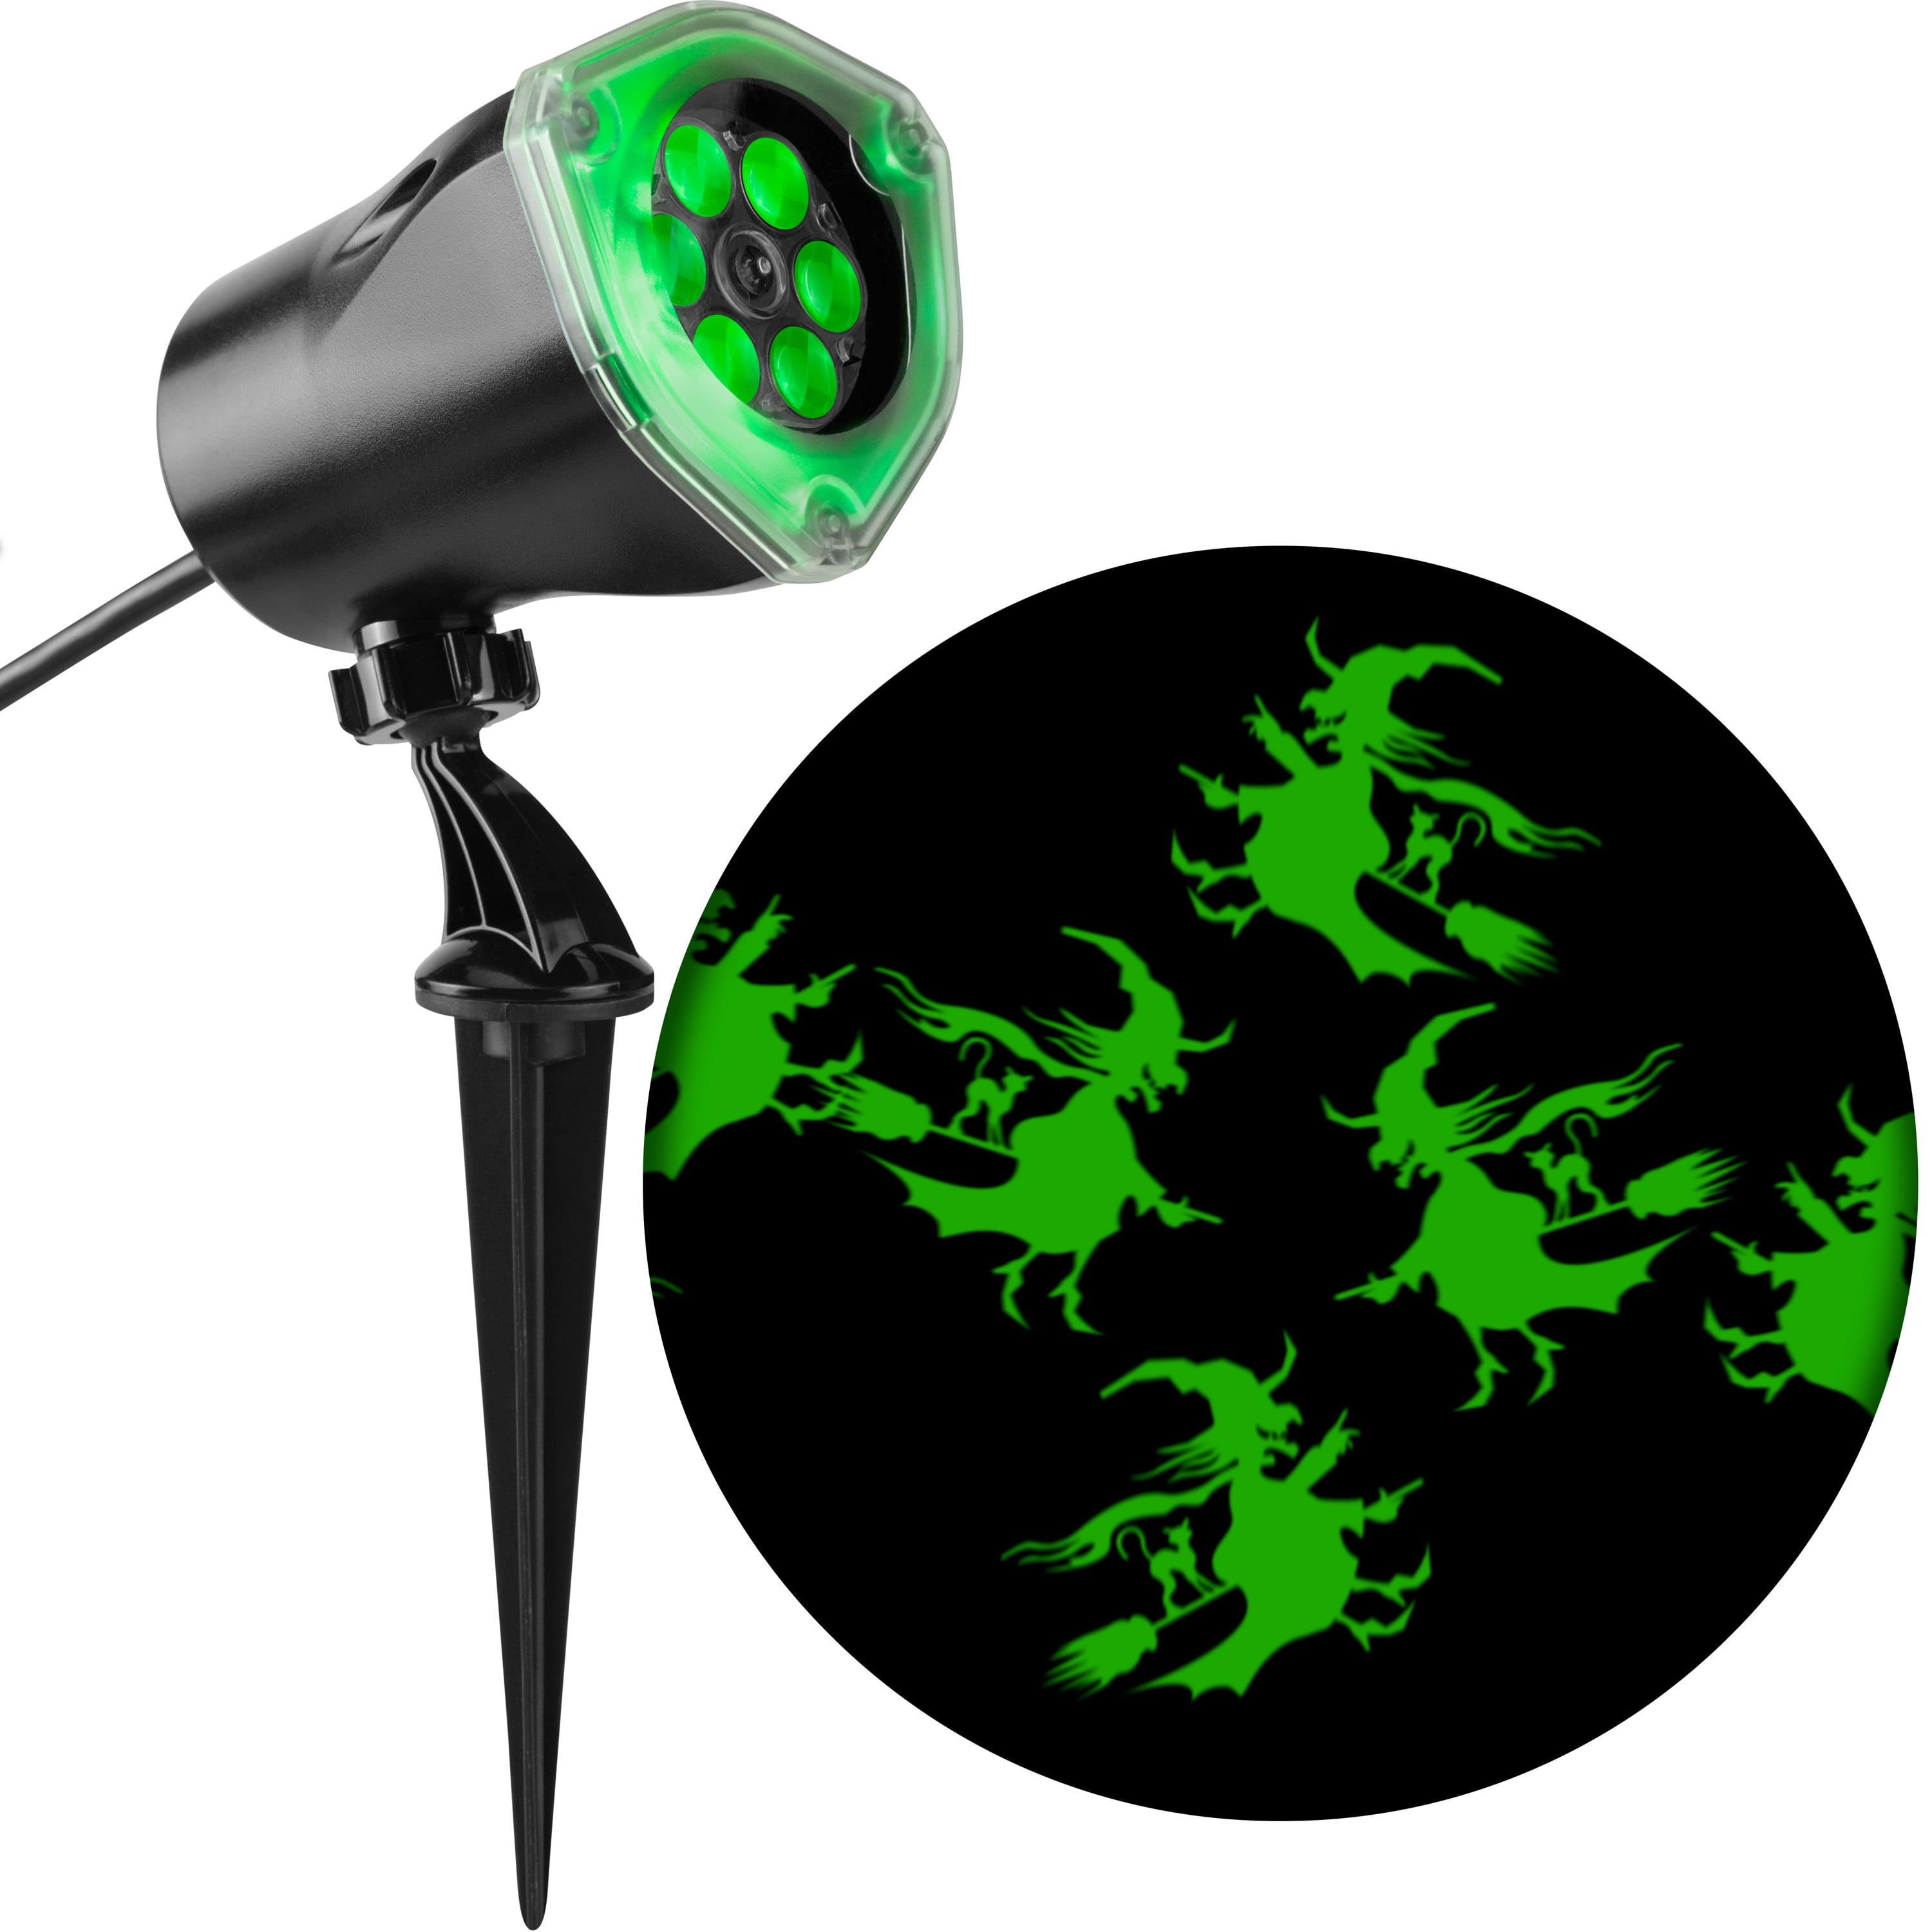 WHIRL-A-MOTION HALLOWEEN LED LIGHT PROJECTOR GREEN WITCH for sale online 